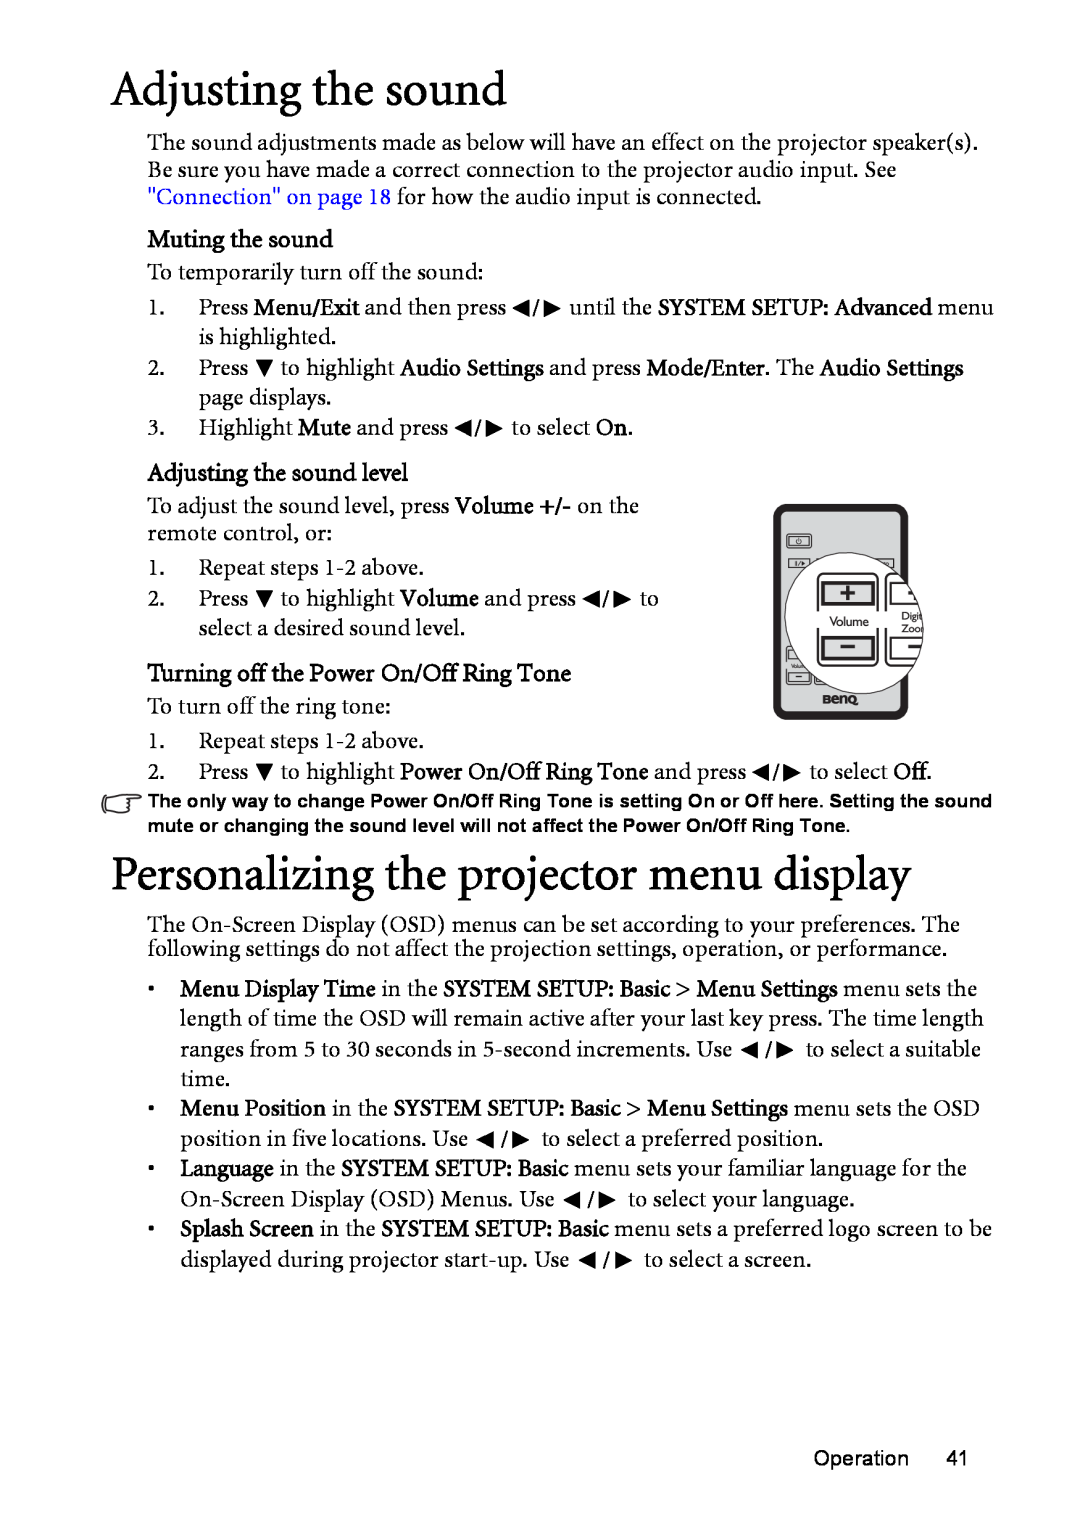 BenQ MP525 ST user manual Personalizing the projector menu display, Muting the sound, Adjusting the sound level 